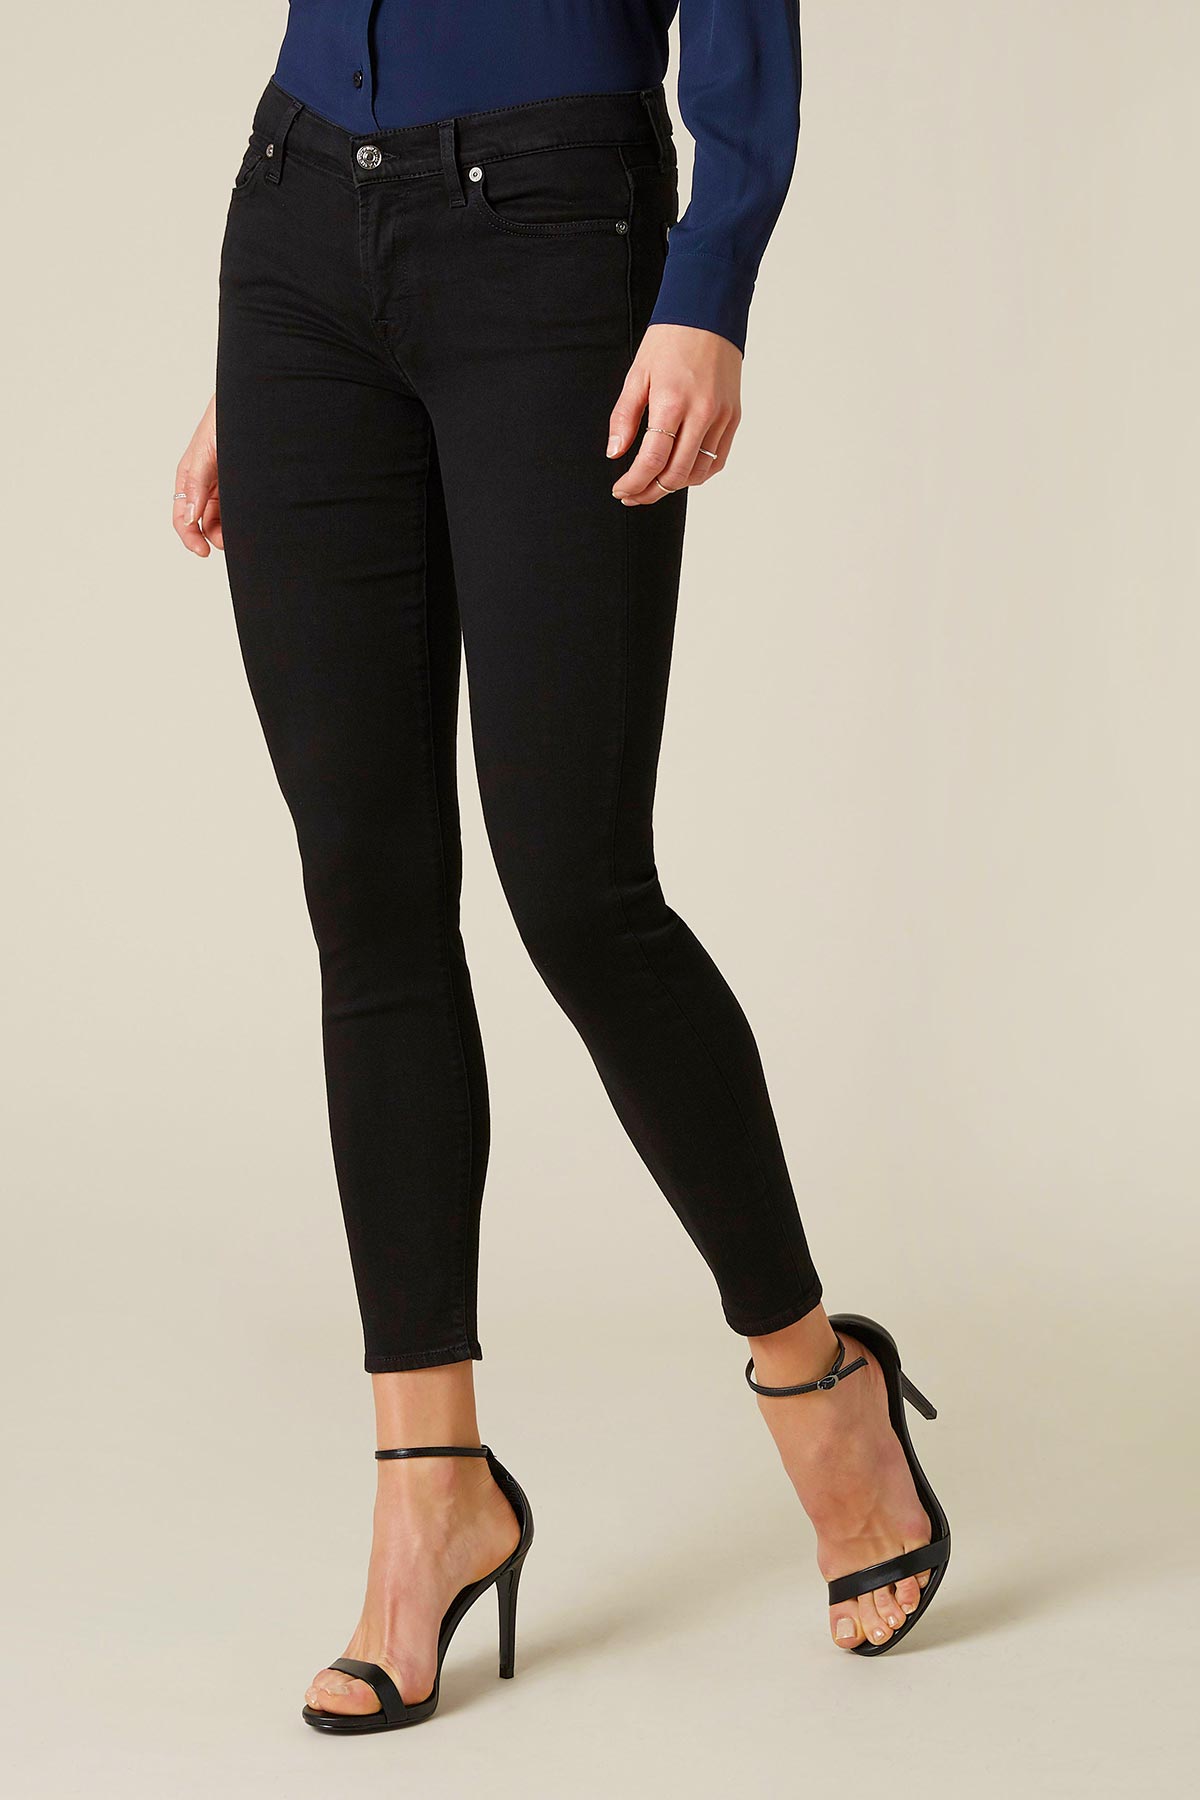 7 For All Mankind Süper Skinny Fit Jeans-Libas Trendy Fashion Store